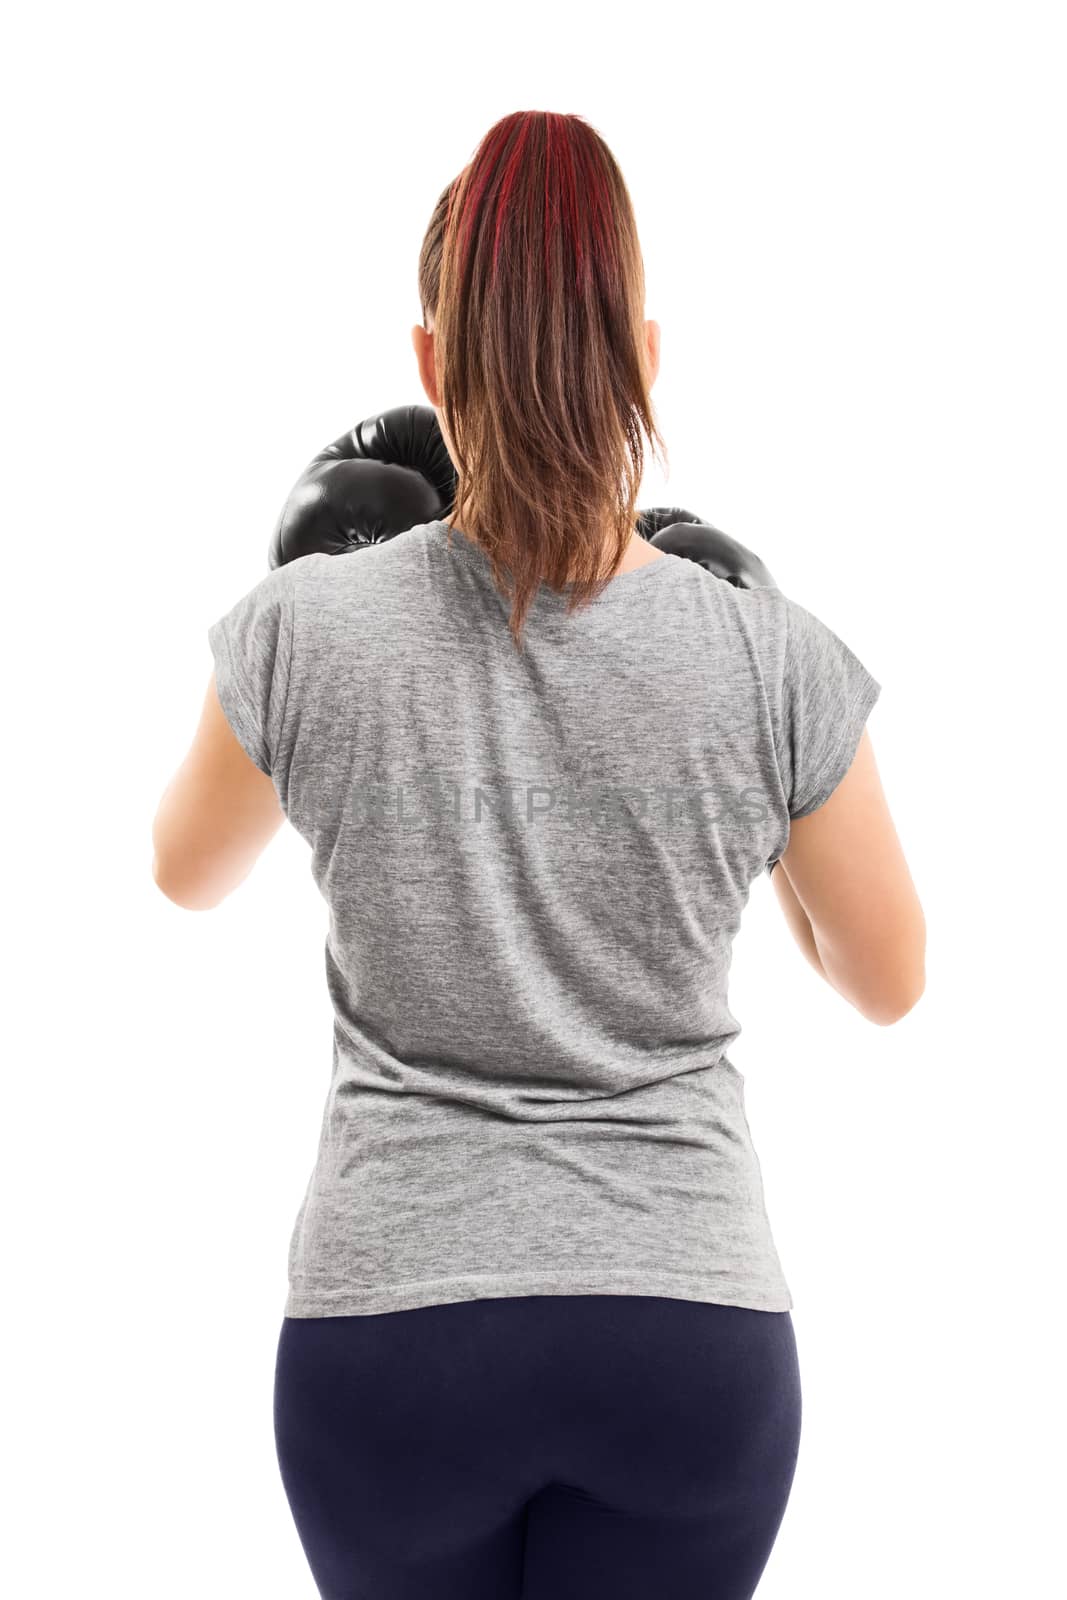 Back shot of a young female boxer by Mendelex